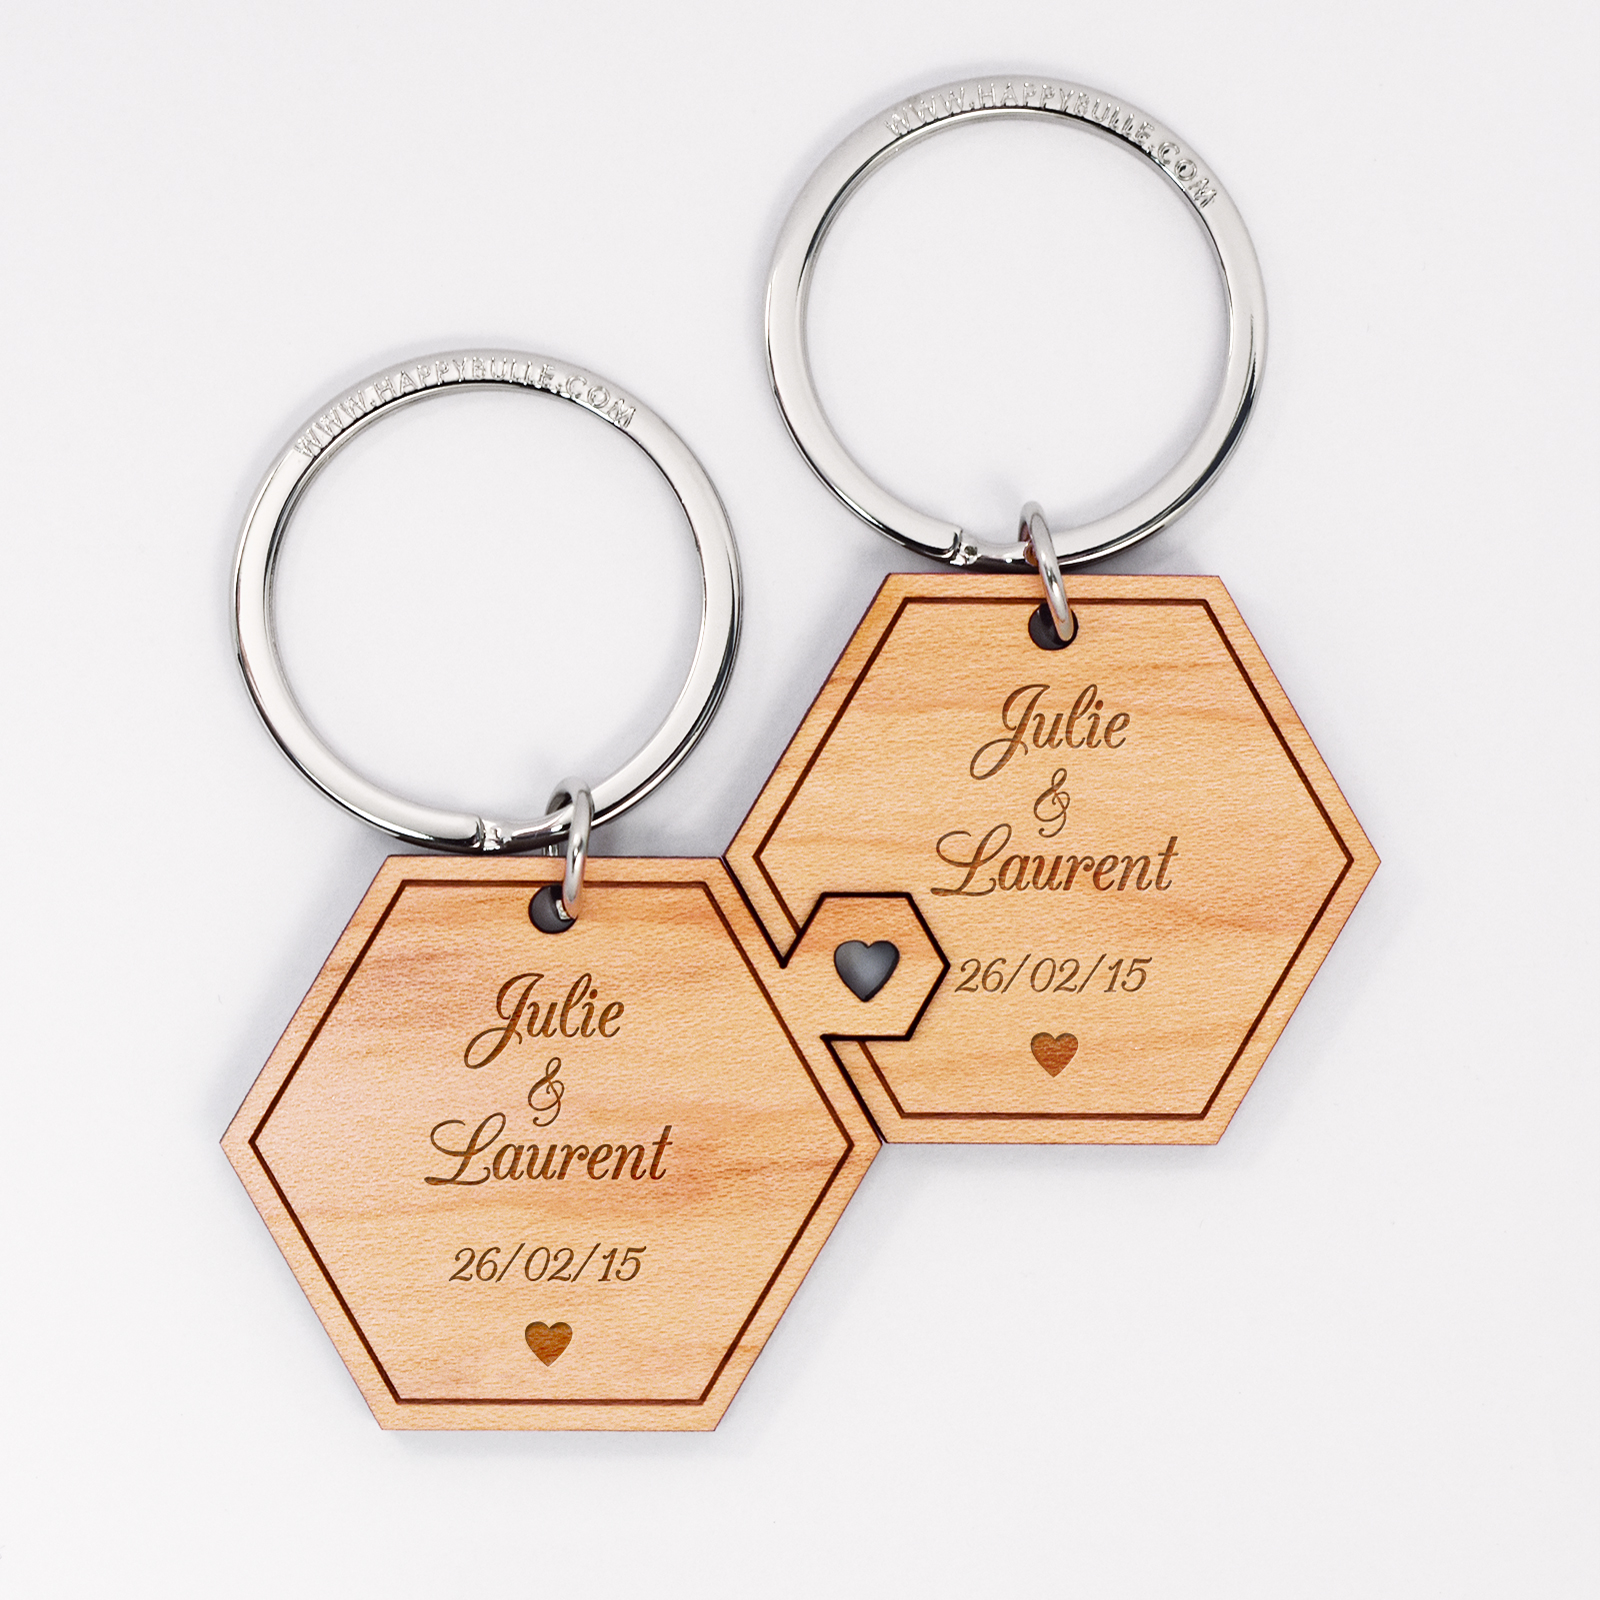 Pair of personalised engraved wooden hexagons "for lovers" medallion keyrings - 1